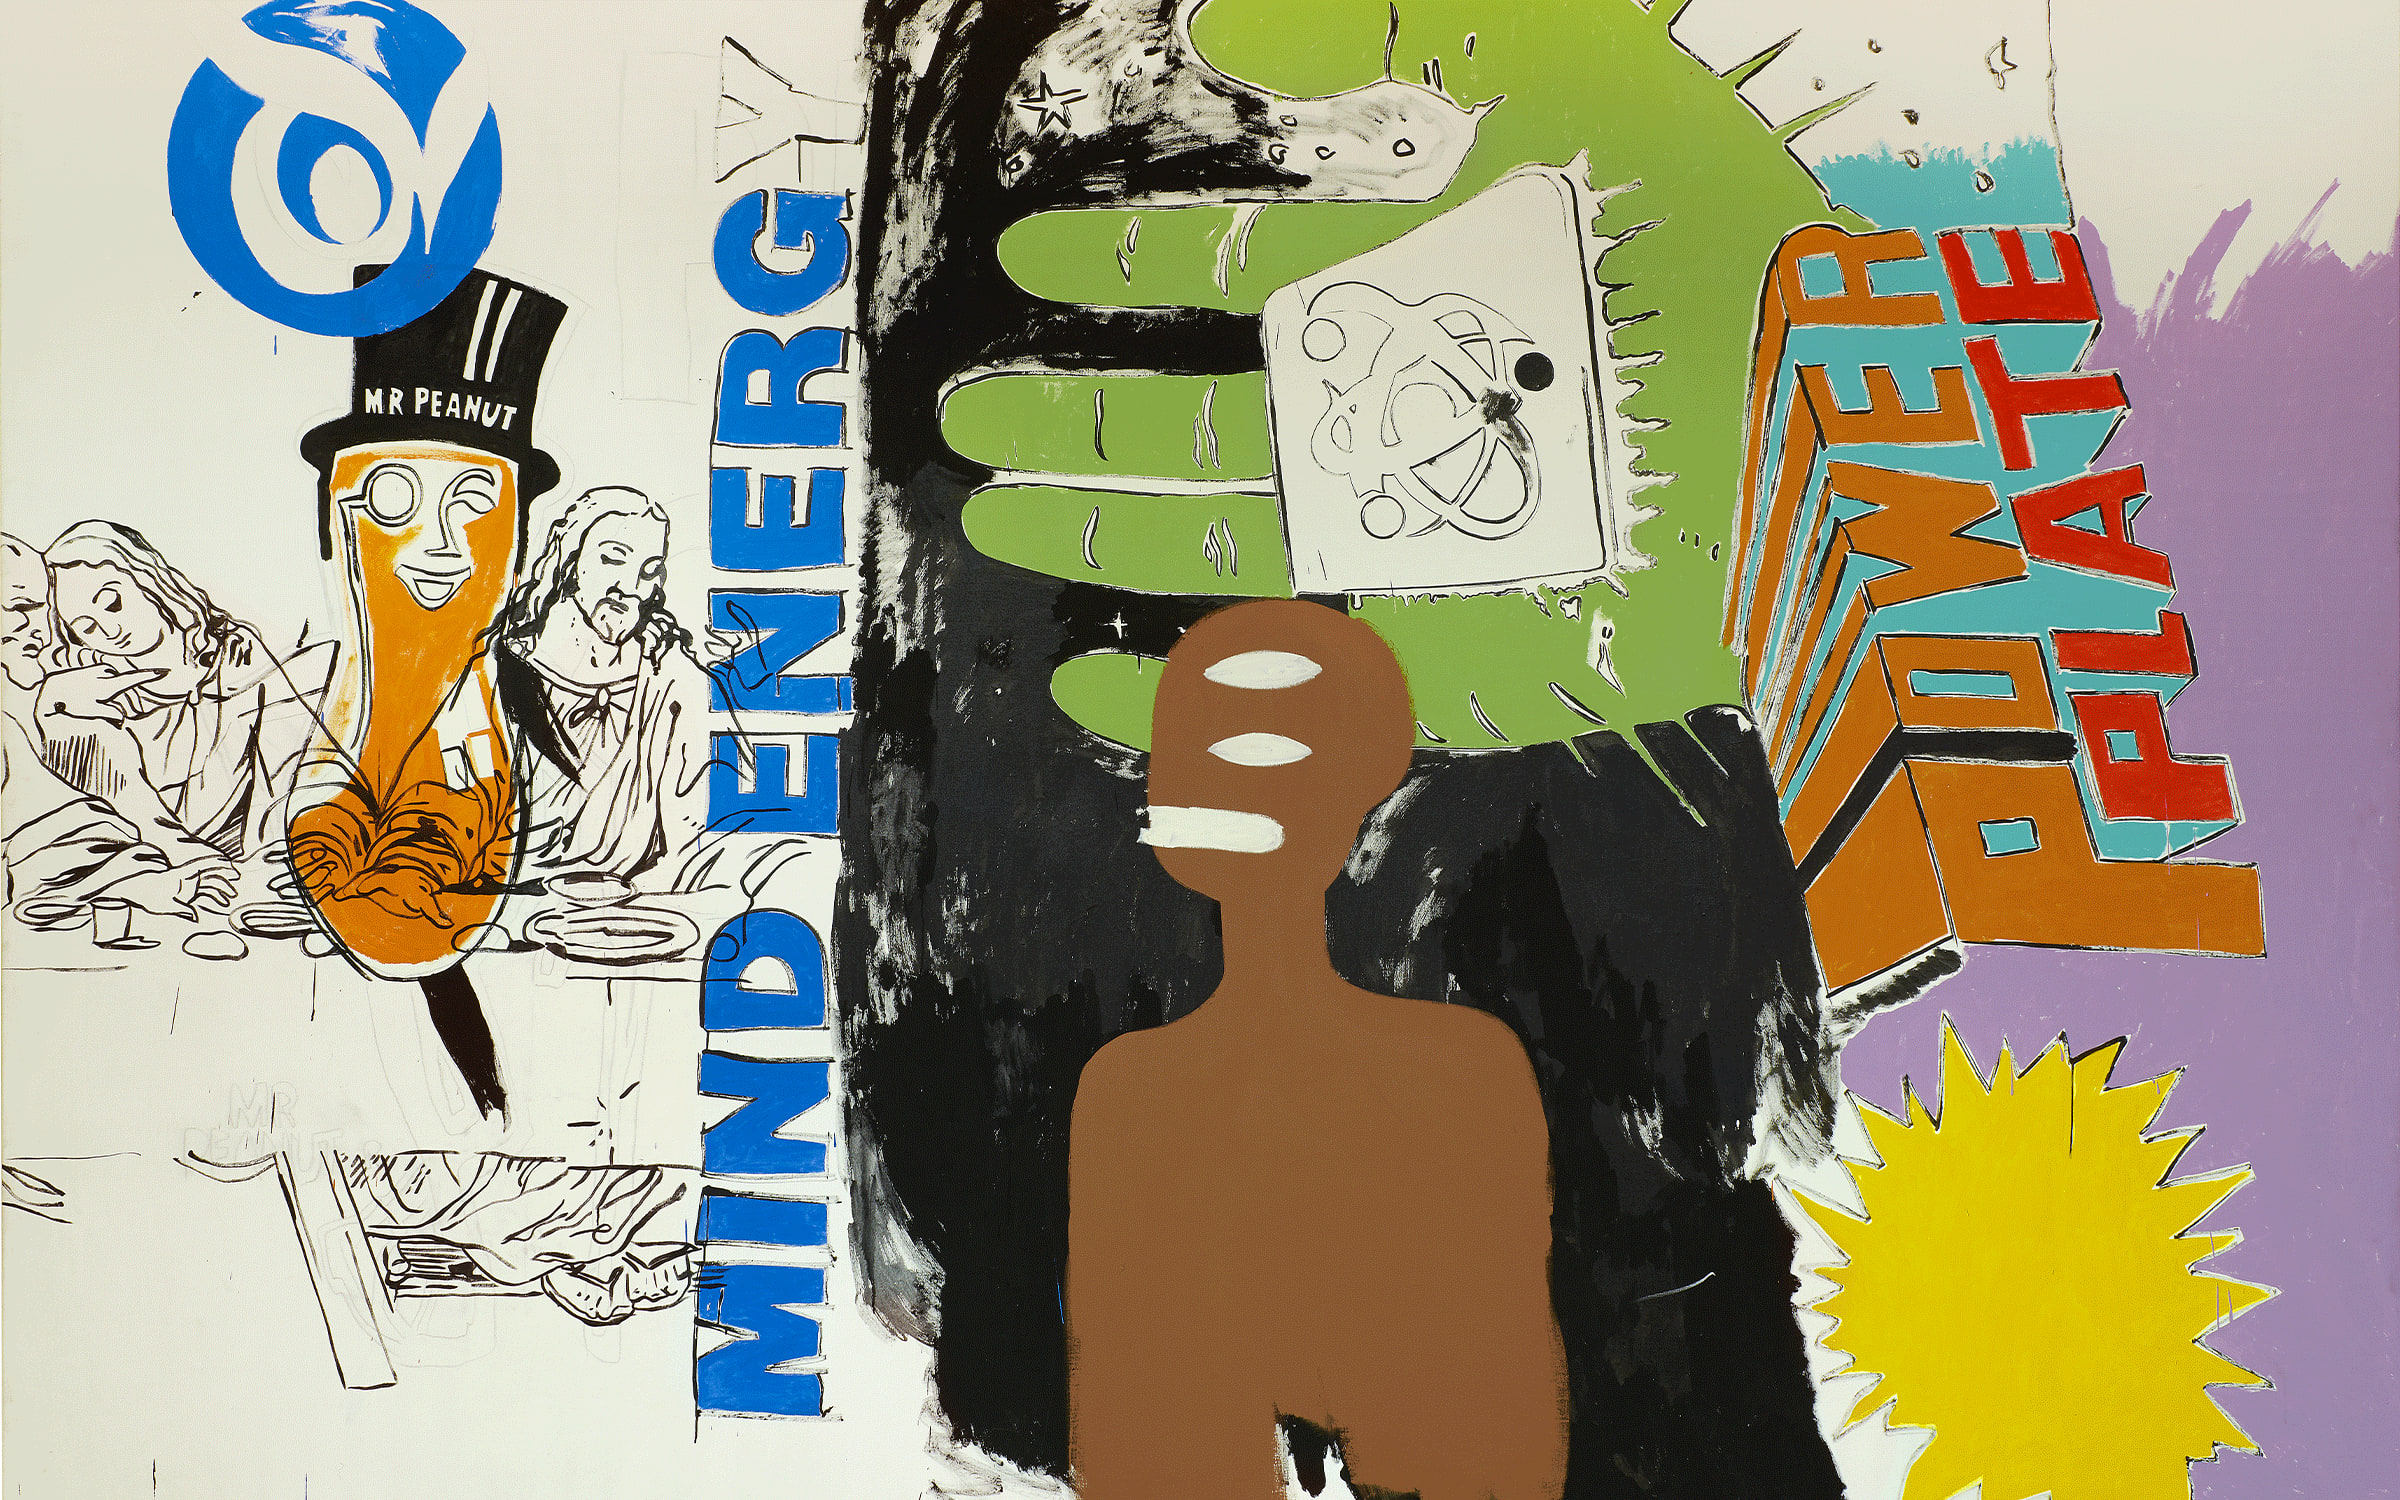 Jean-Michel Basquiat and Andy Warhol, Mind Energy, 1984. Courtesy of Galerie Bruno Bischofberger, Männedorf-Zurich. © Estate of Jean-Michel Basquiat Licensed by Artestar, New York © The Andy Warhol Foundation for the Visual Arts, Inc. / Licensed by ADAGP, Paris 2023.